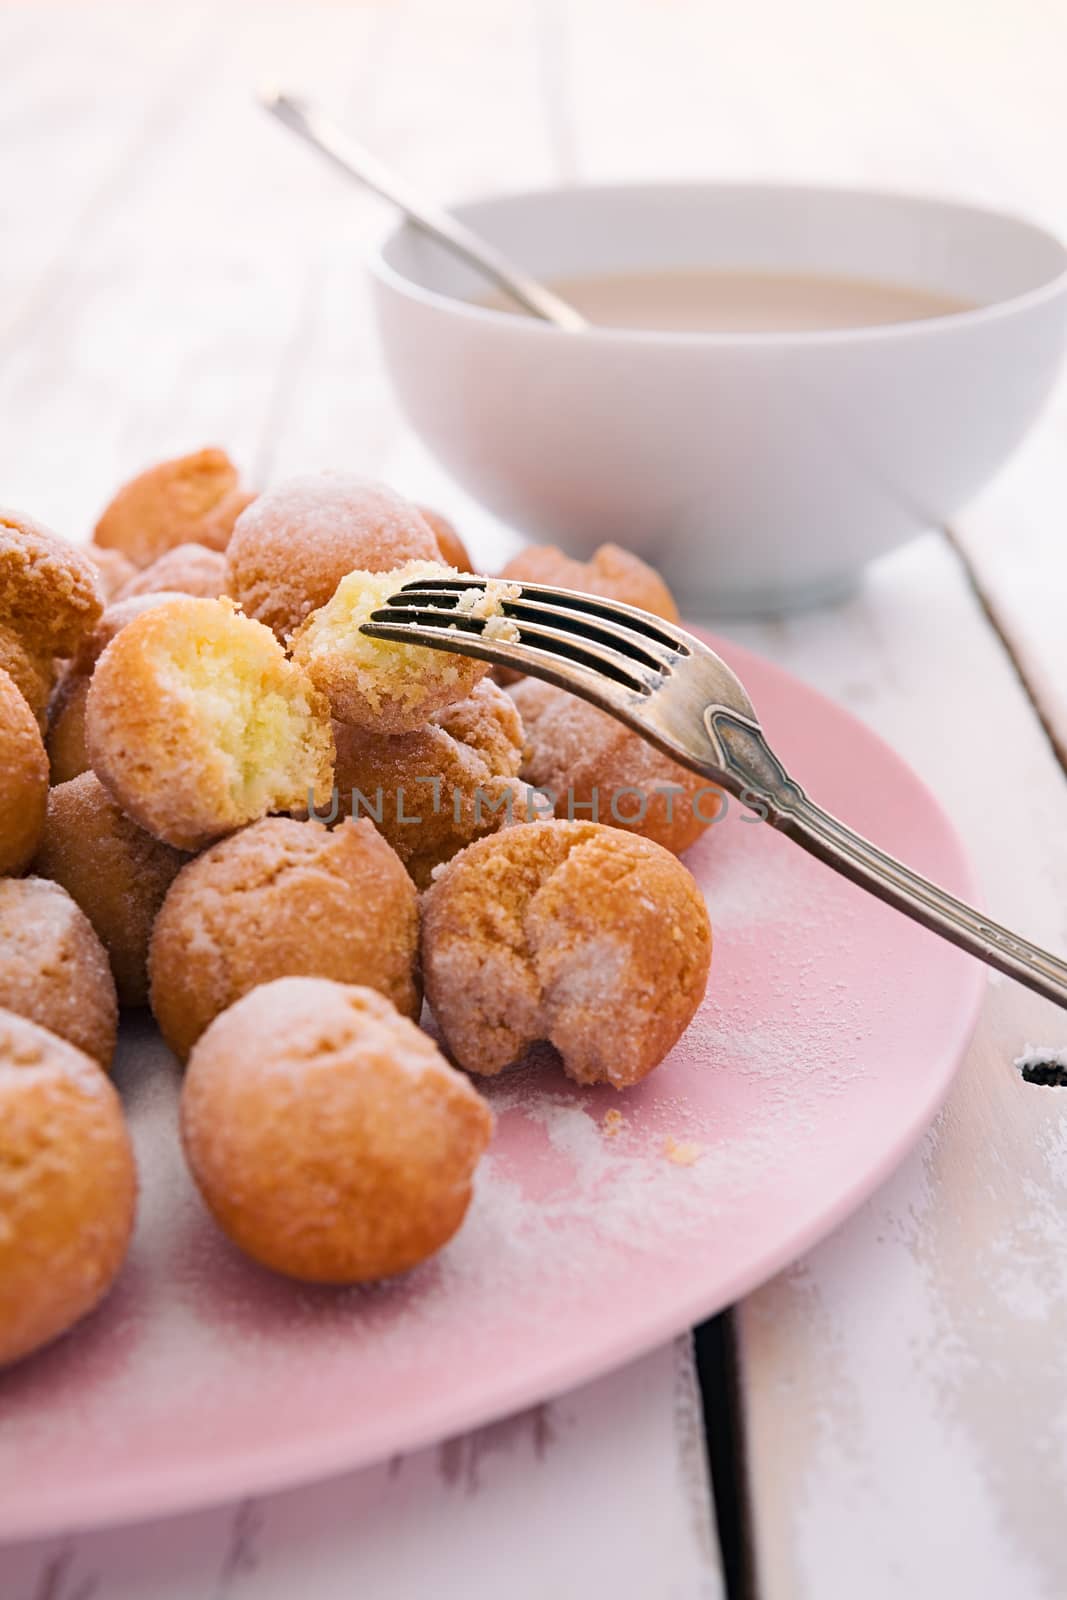 Closeup of castagnole, typical Italian carnival sweet on a pink plate with milk and coffee cup